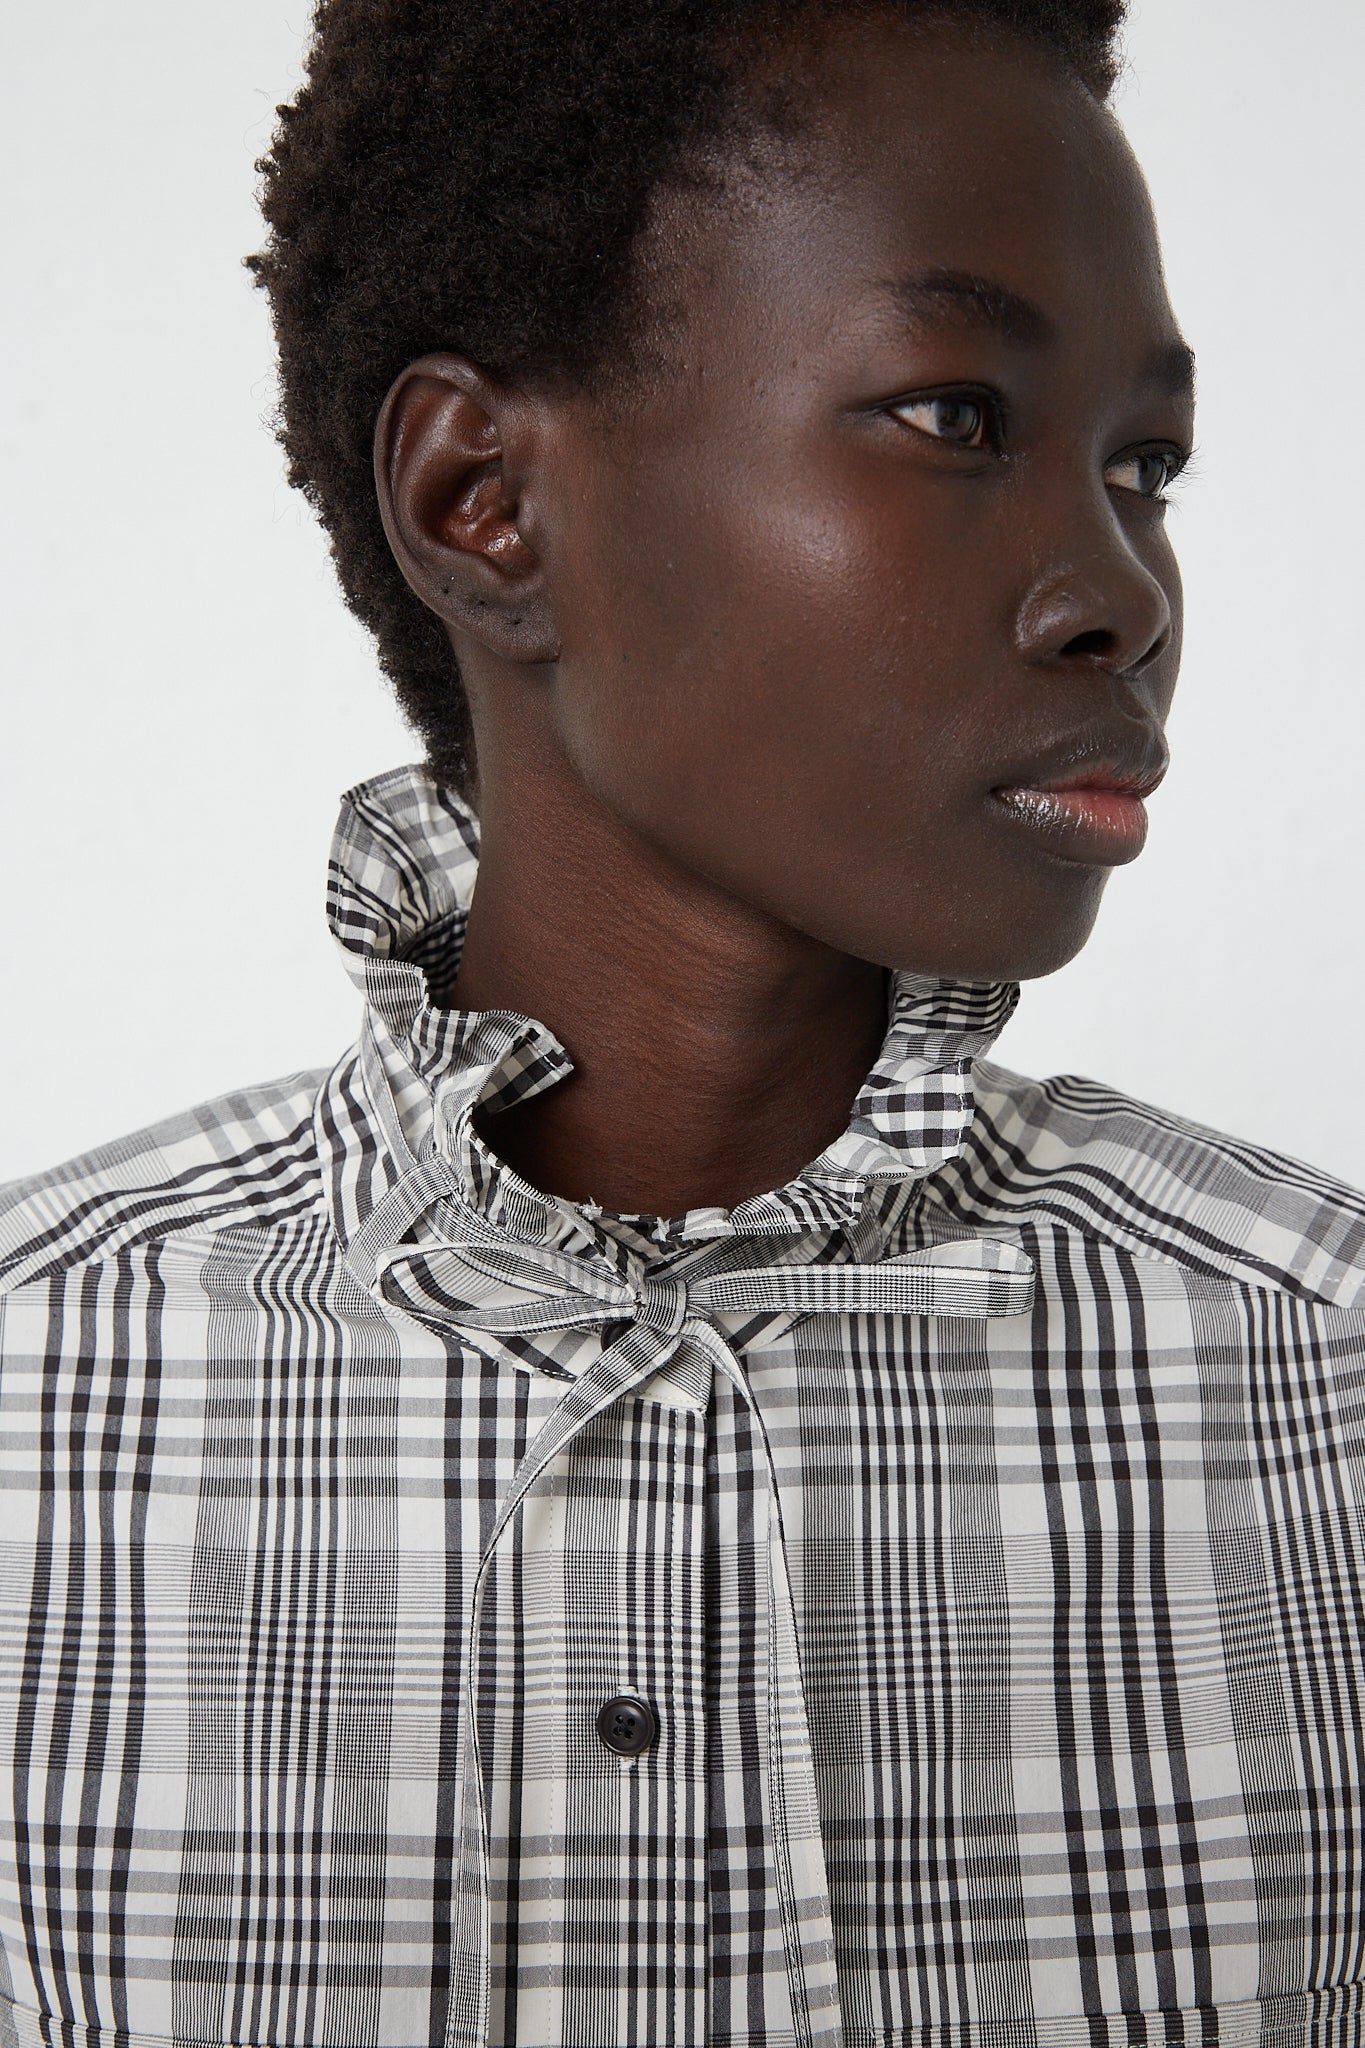 A KasMaria Poplin Tie Shirt with Ruffle Collar in Heavy Plaid. Up close view of collar.